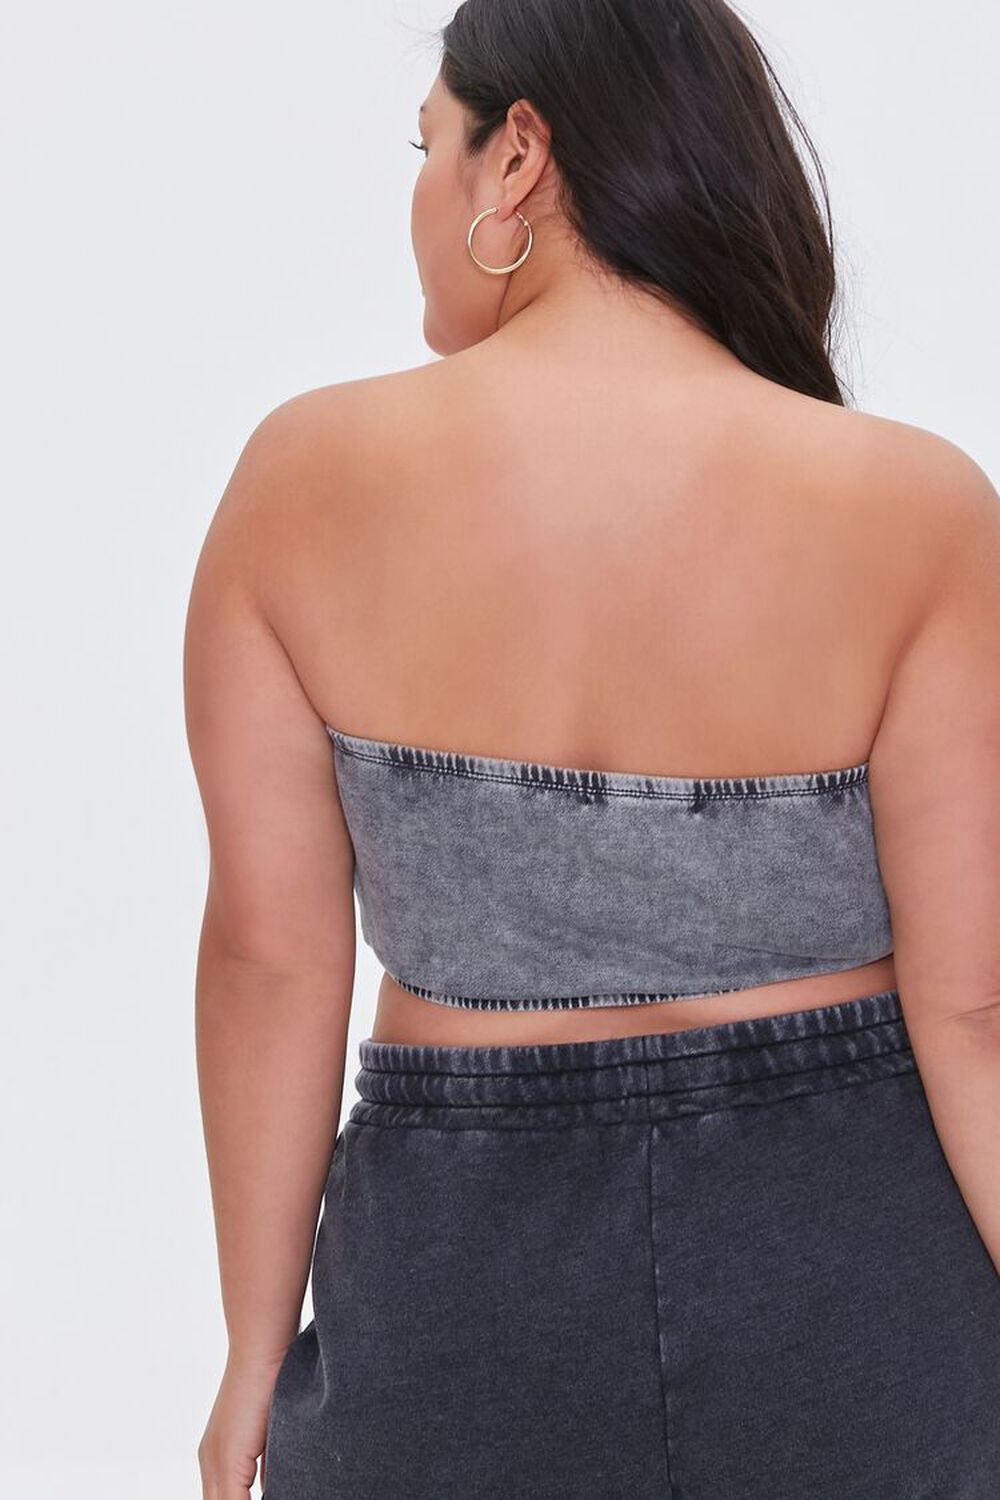 CHARCOAL Plus Size Mineral Wash Tube Top, image 3